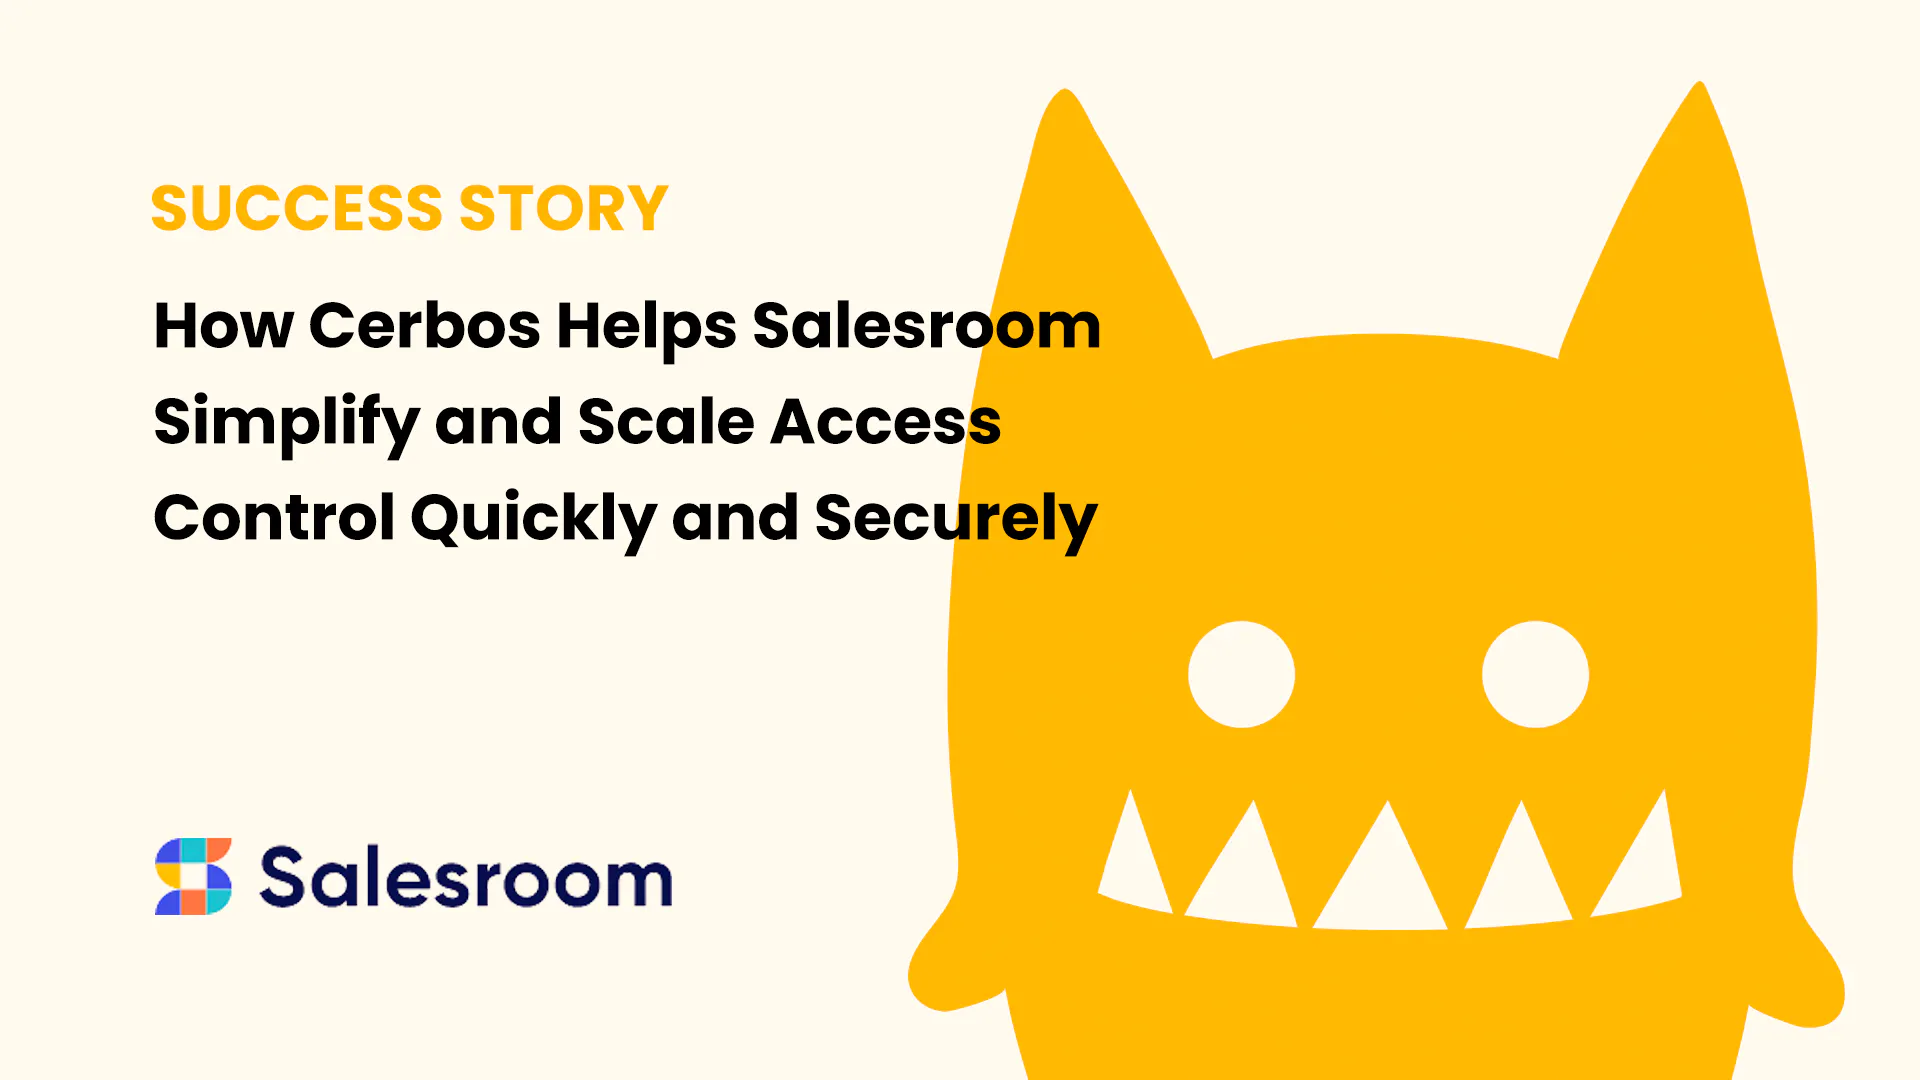 how-cerbos-helps-salesroom-simplify-and-scale-access-control-quickly-and-securely (1)